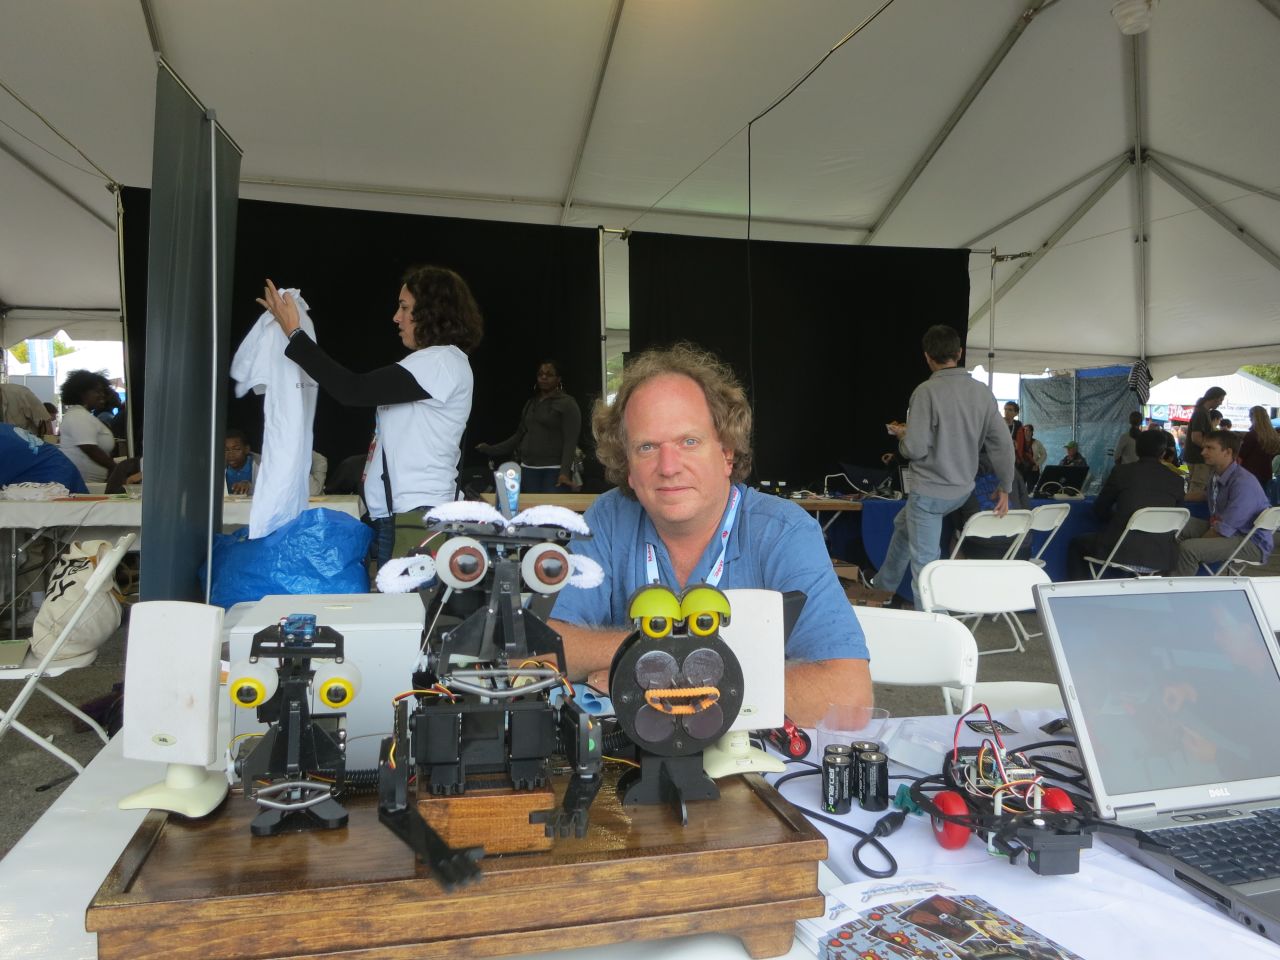 Brian Patton from Trenton, New Jersey brought a singing robot to the recent Maker Faire in New York. With eyebrows made from pipe cleaners and eye's borrowed from a doll, the robot is synched to a computer program that Patton devised and allows him to control facial expressions.